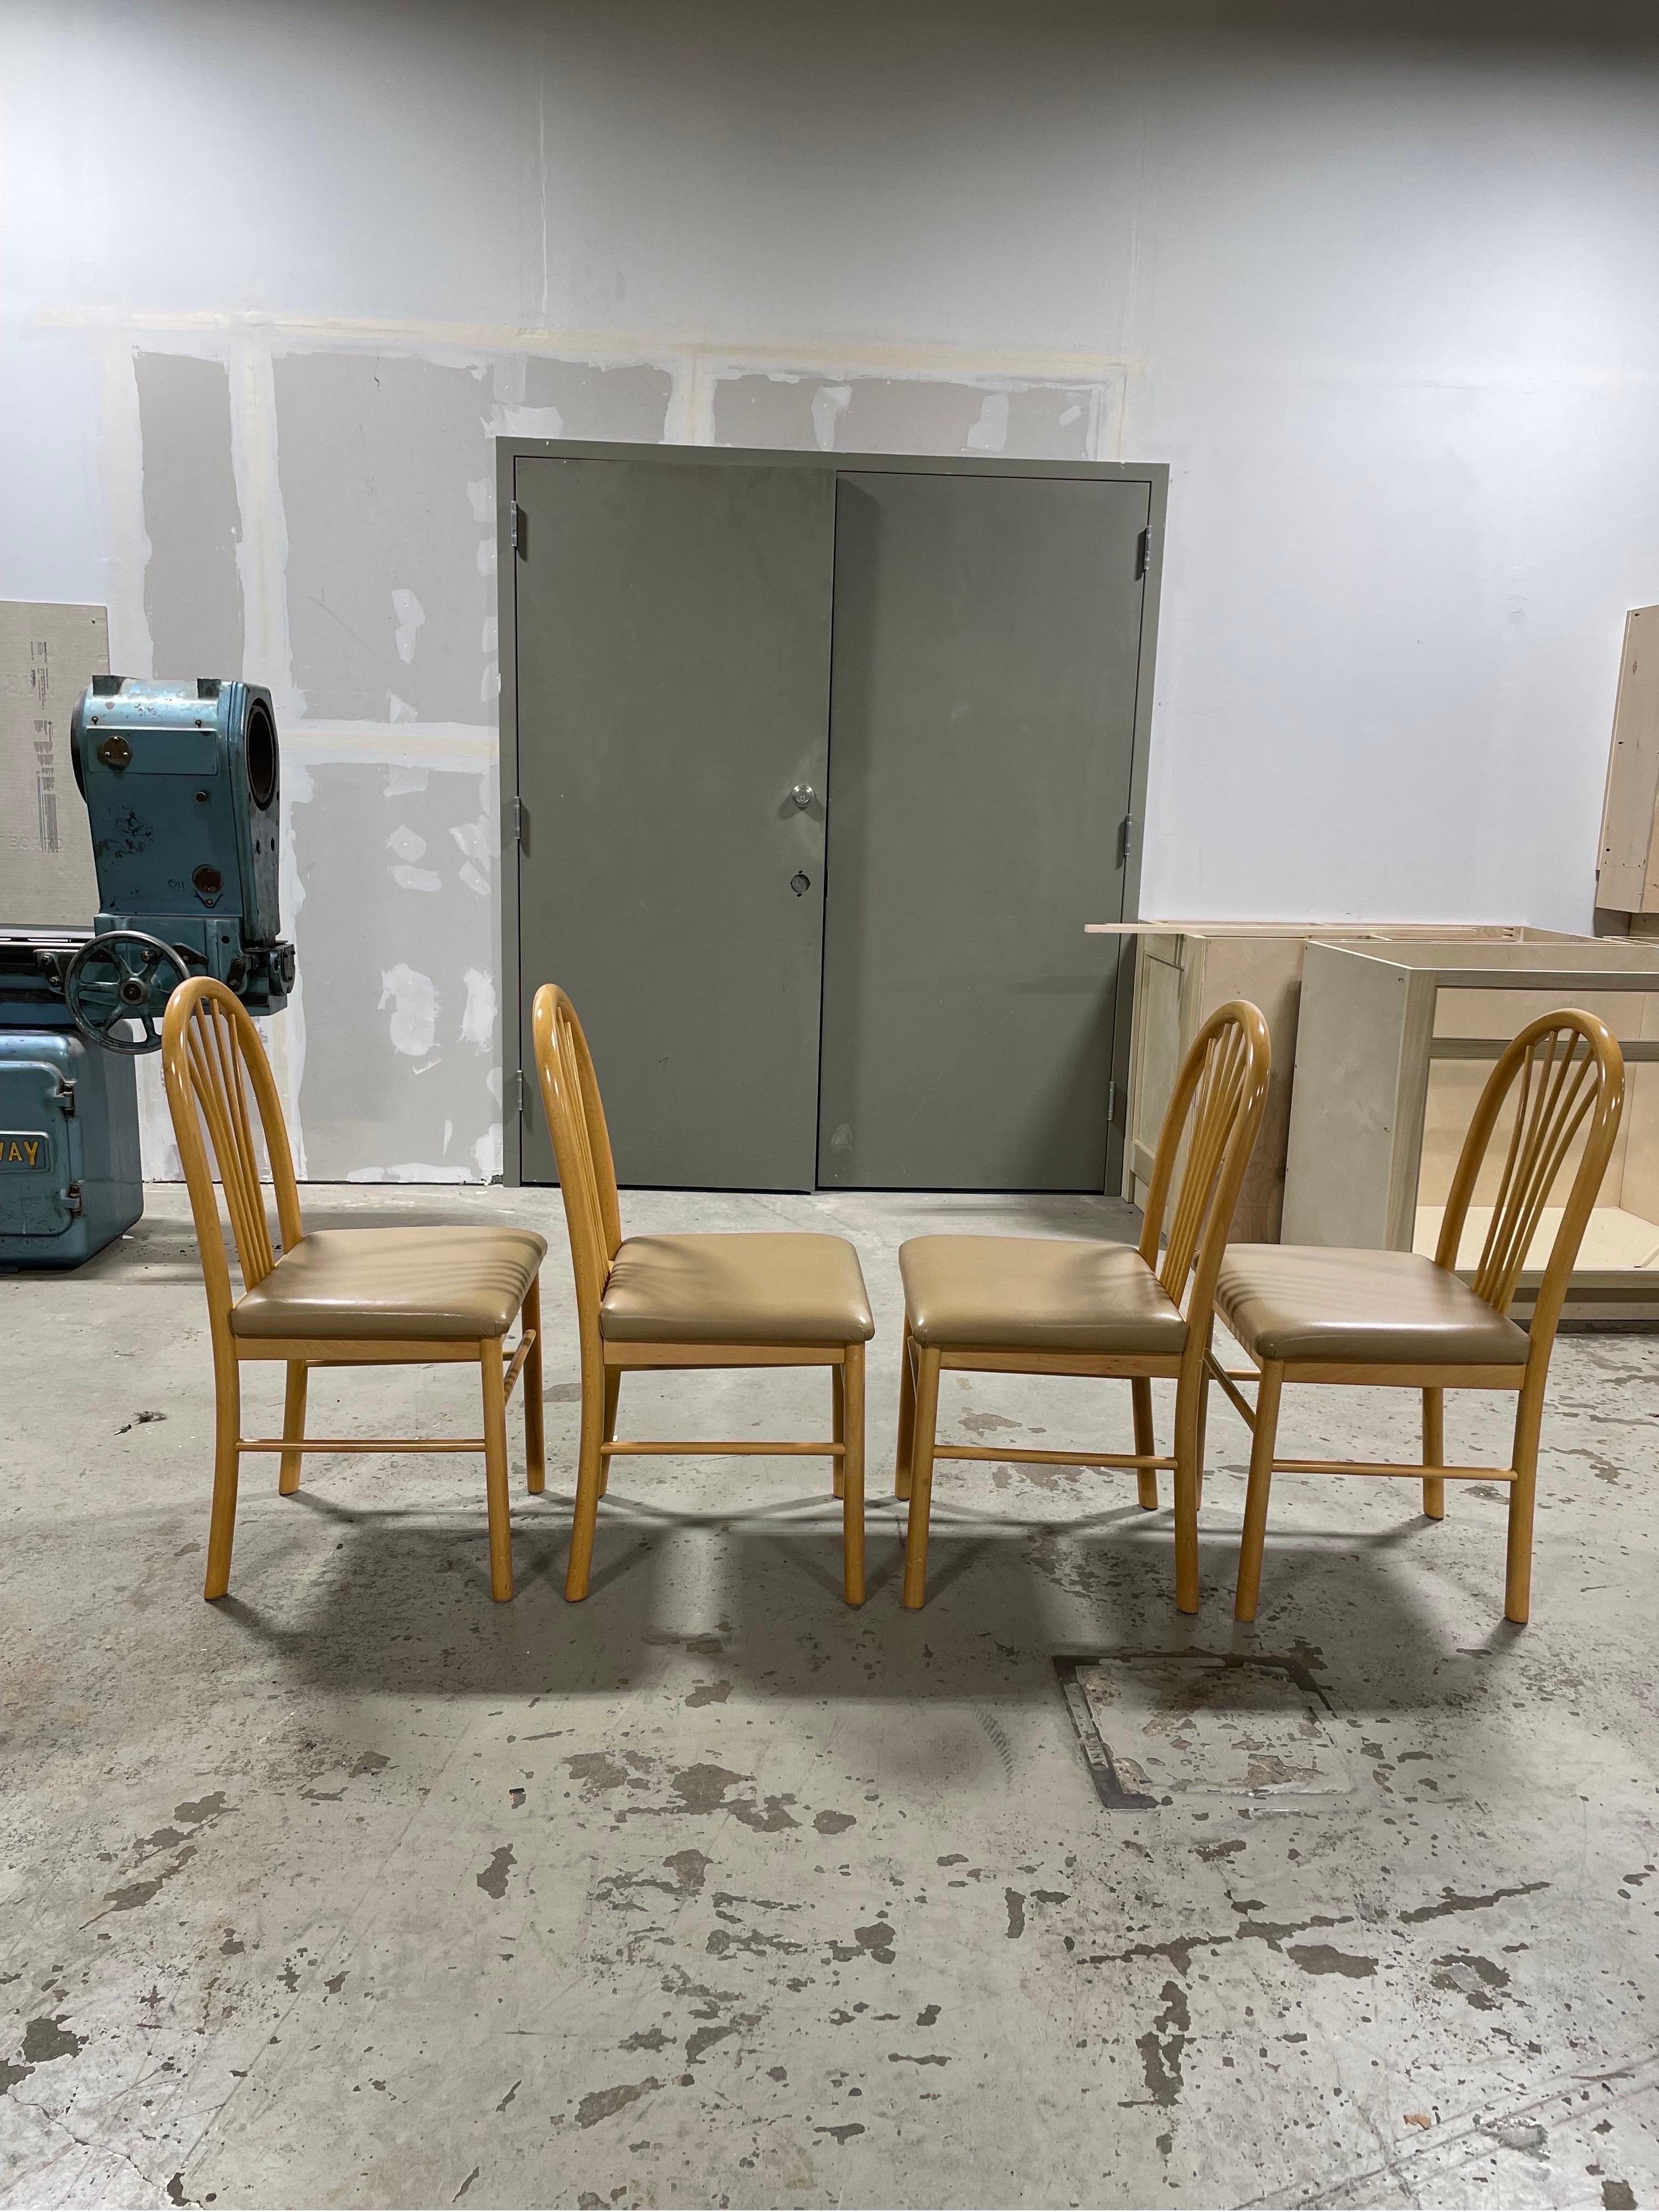 Postmodern round wood curved dining chairs in the manner of Annig Sarian for Tisettanta. Great simplistic period design.
Curbside available to NYC/Philly $300.